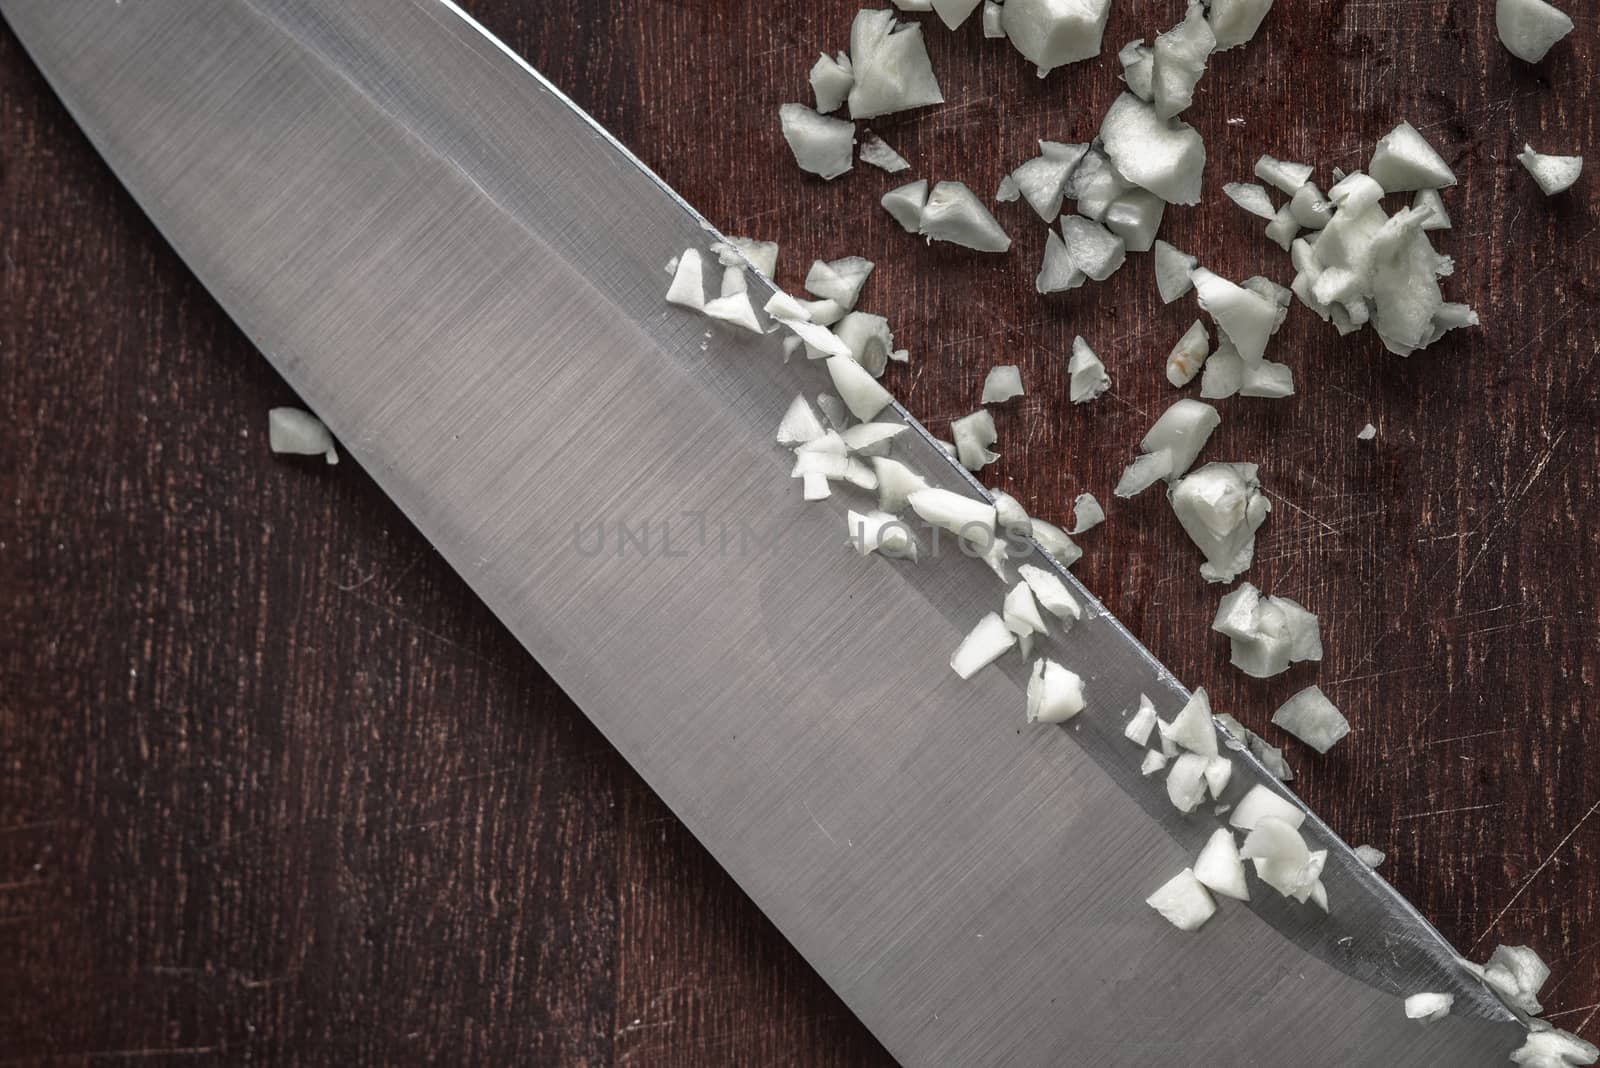 Chopped onion with knife on the wooden board top view by Deniskarpenkov